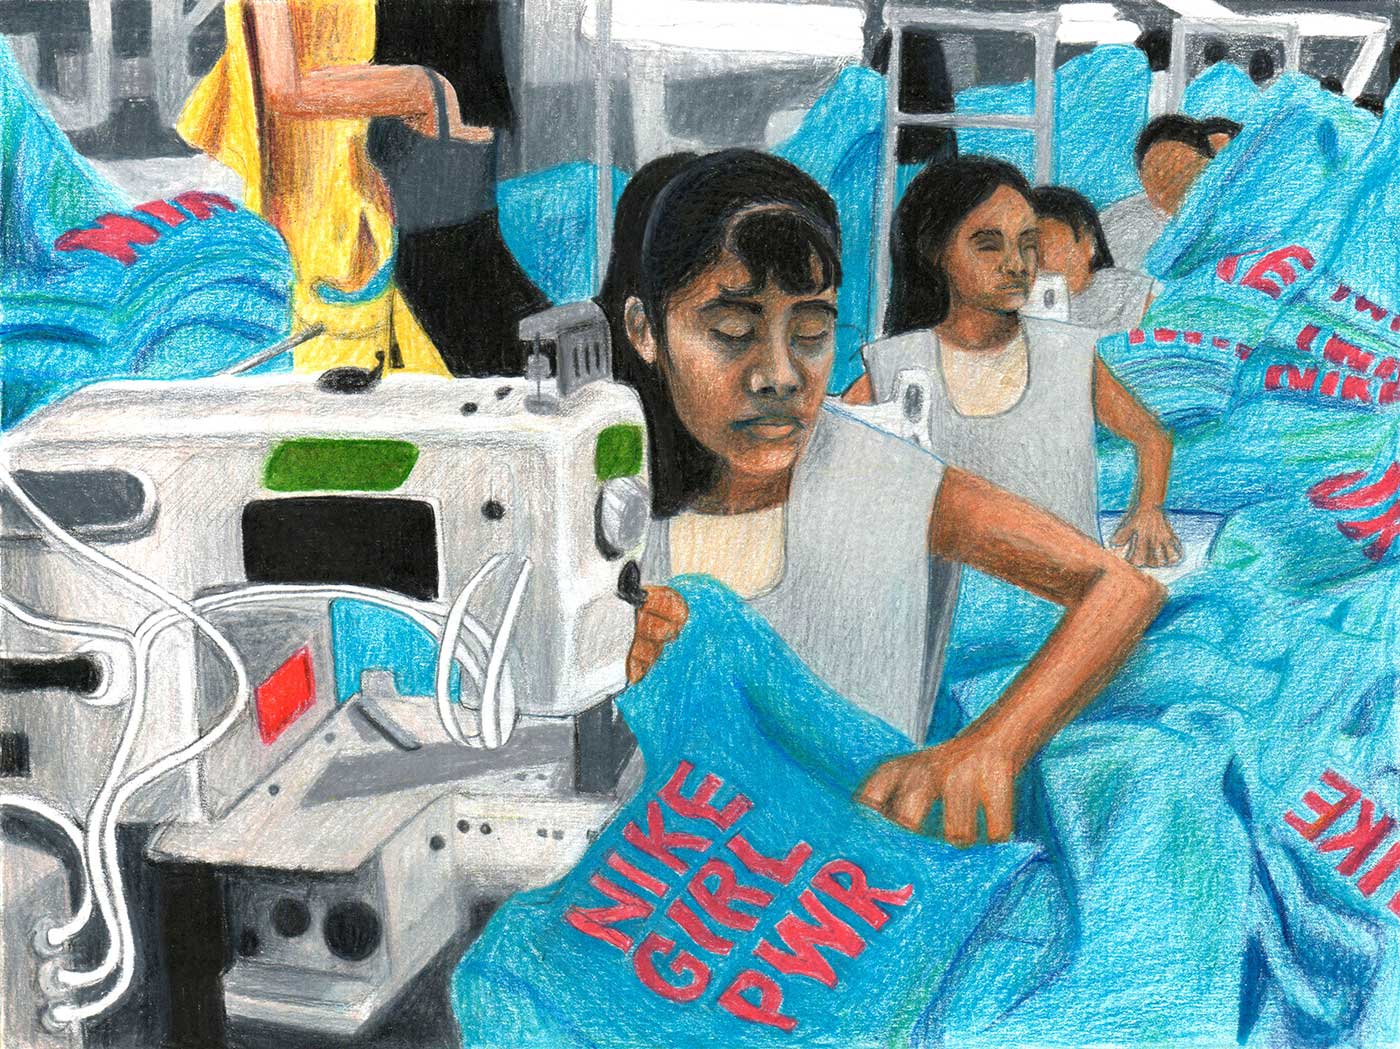 colored pencil drawing of girls sewing female empowerment garments in a sweatshop.